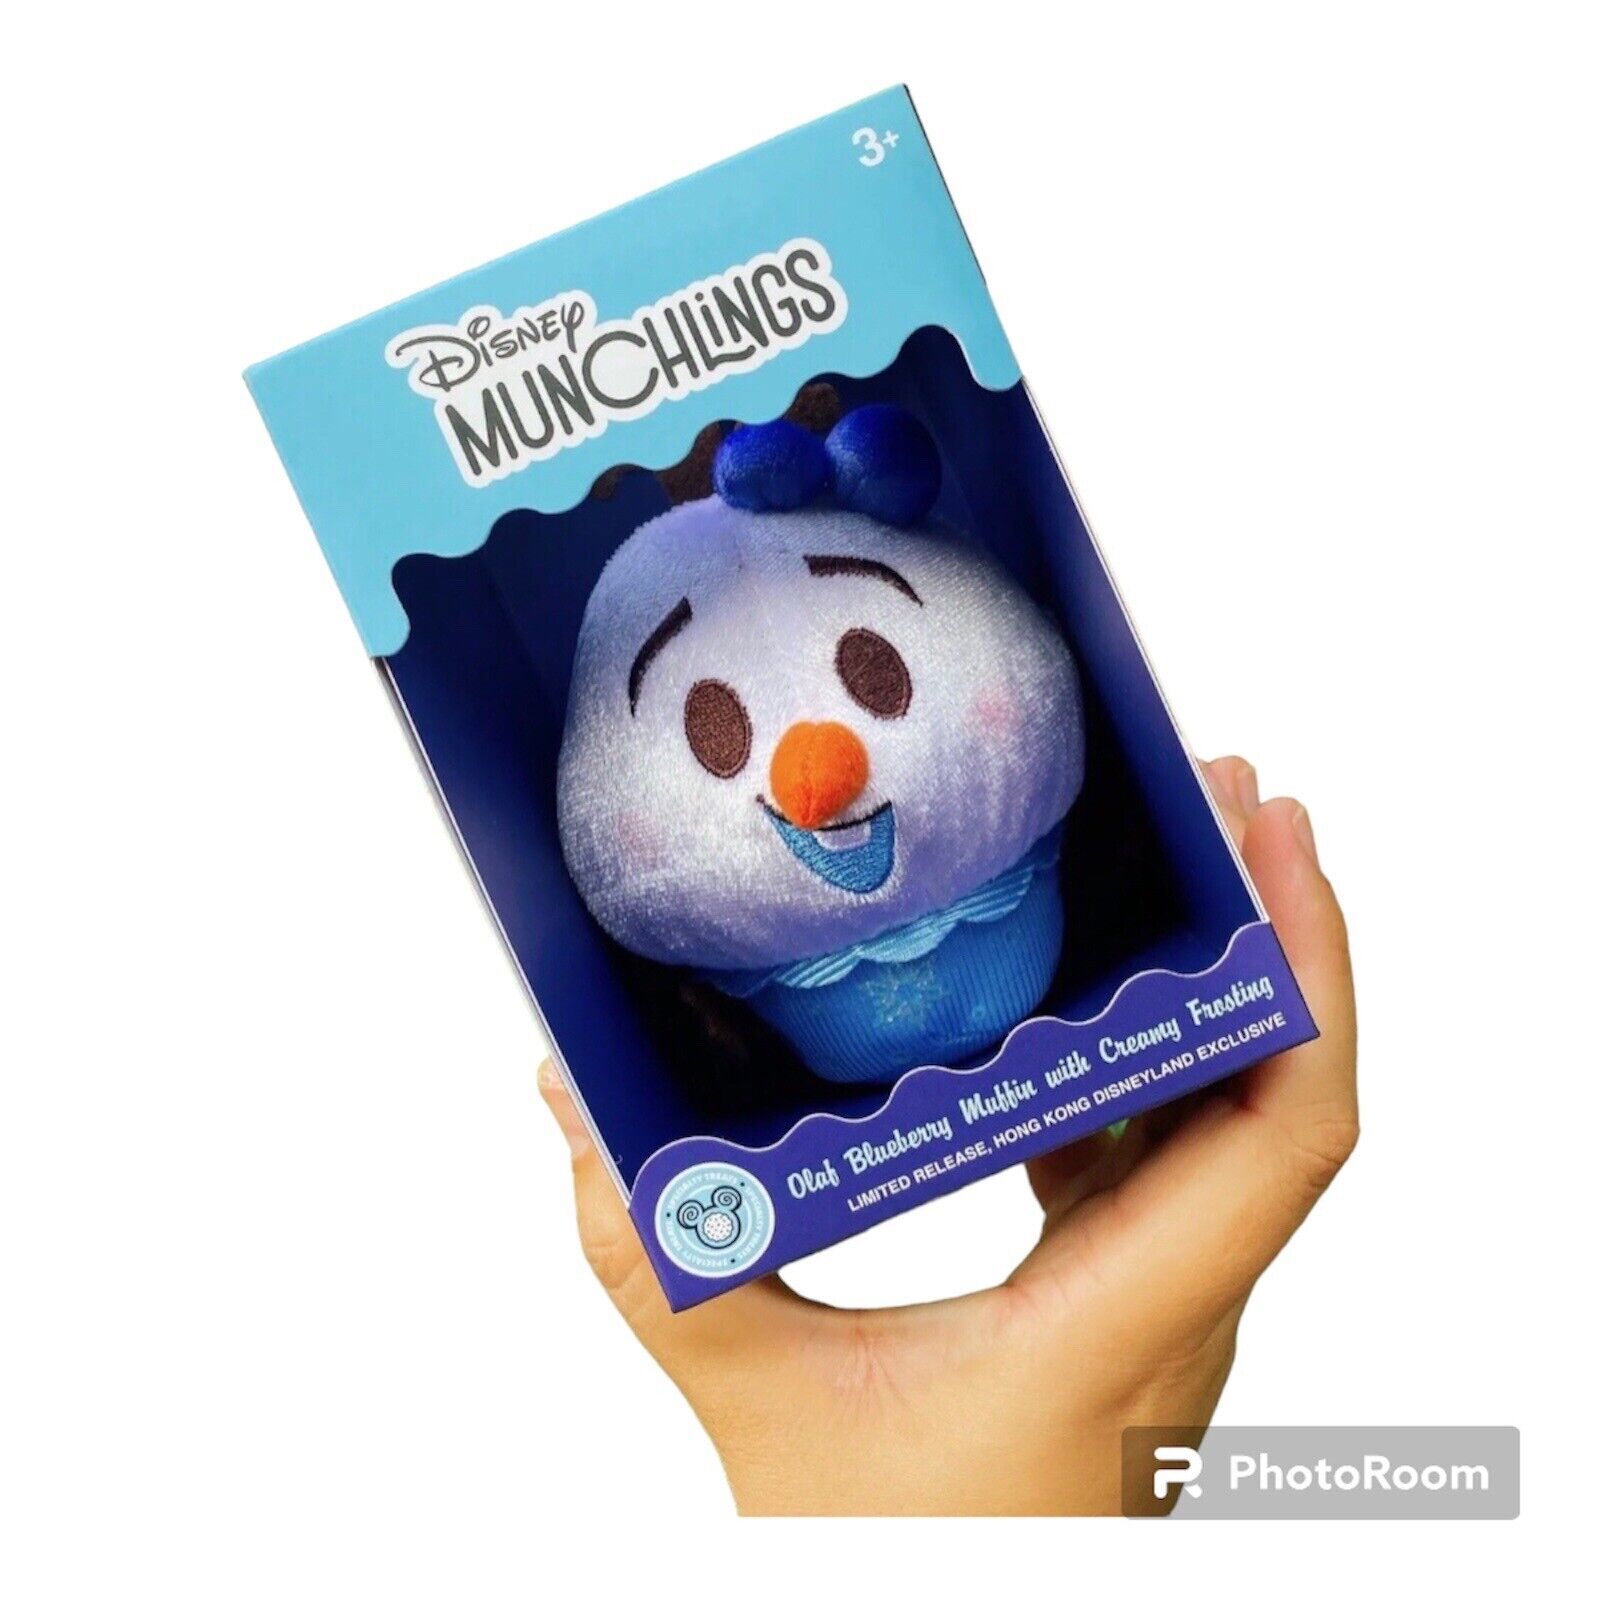 Hong Kong Disneyland Exclusive World Of Frozen Munchlings Olaf Muffin LE Plush